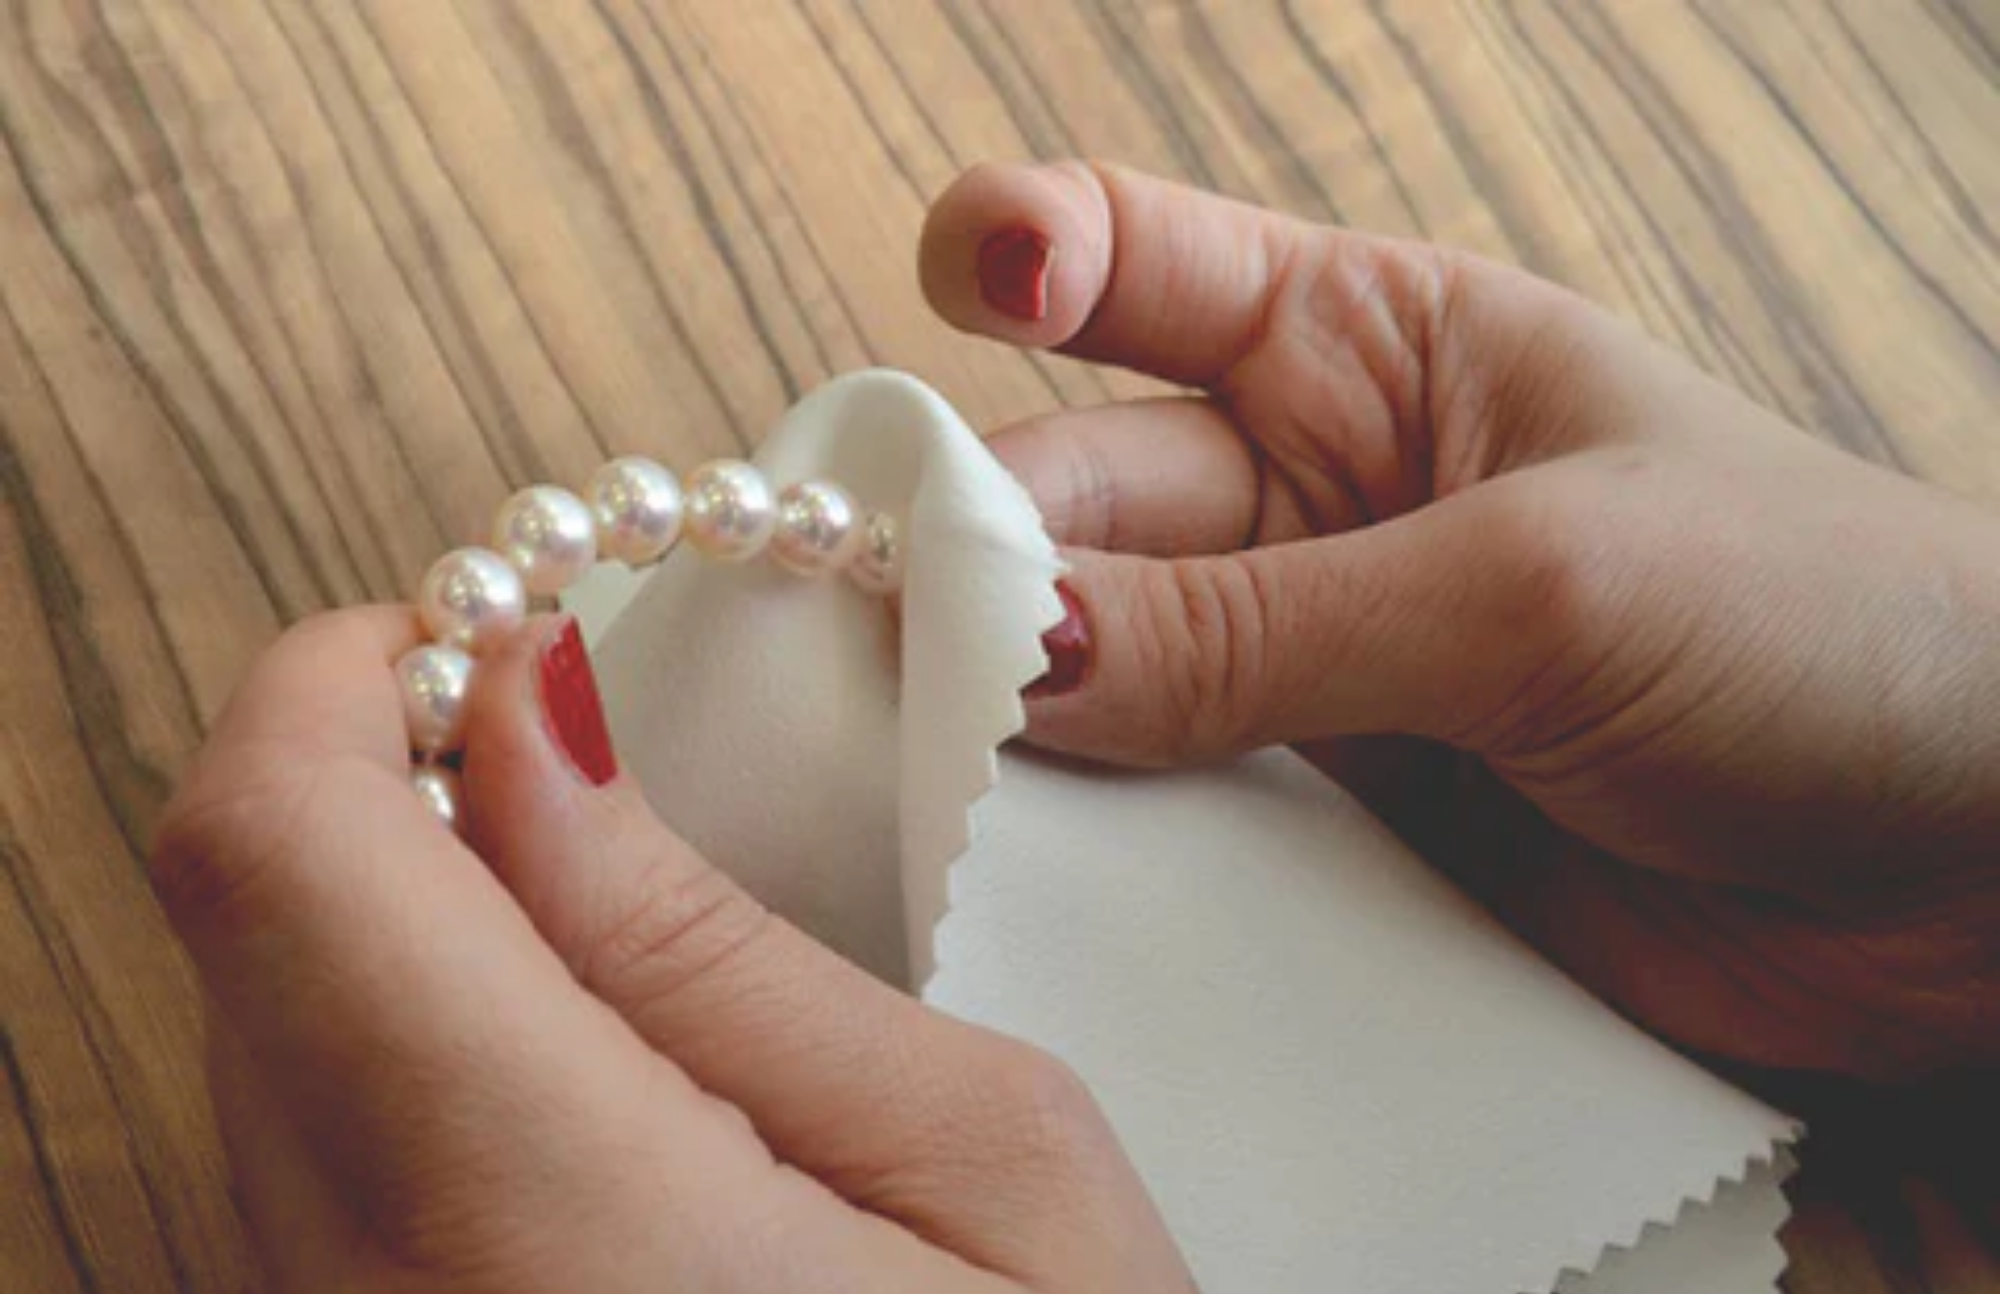 A woman's hand wiping her pearl jewelry